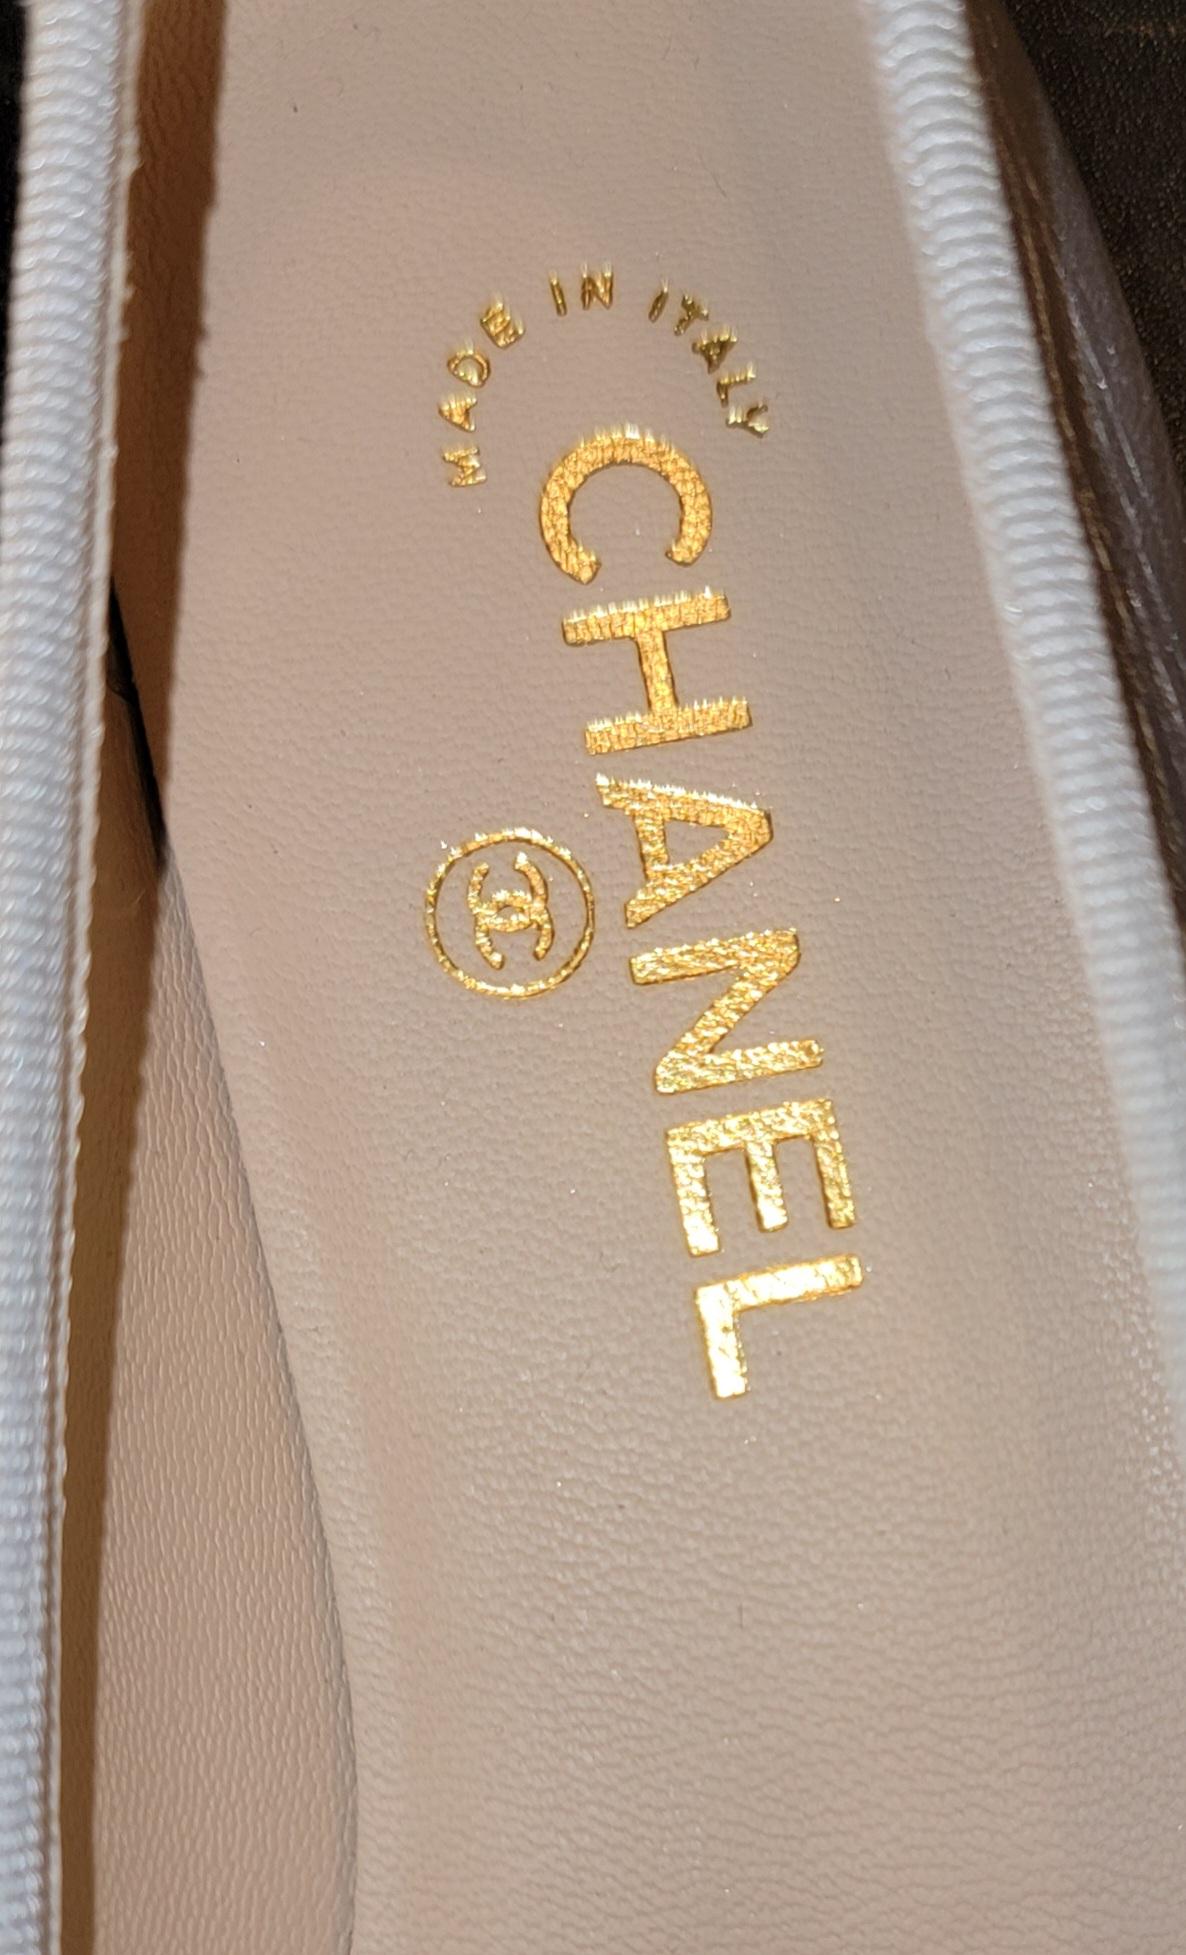 Rare Brand New Chanel Ballerina Size 39 Metalic Silver Shoes For Sale 1